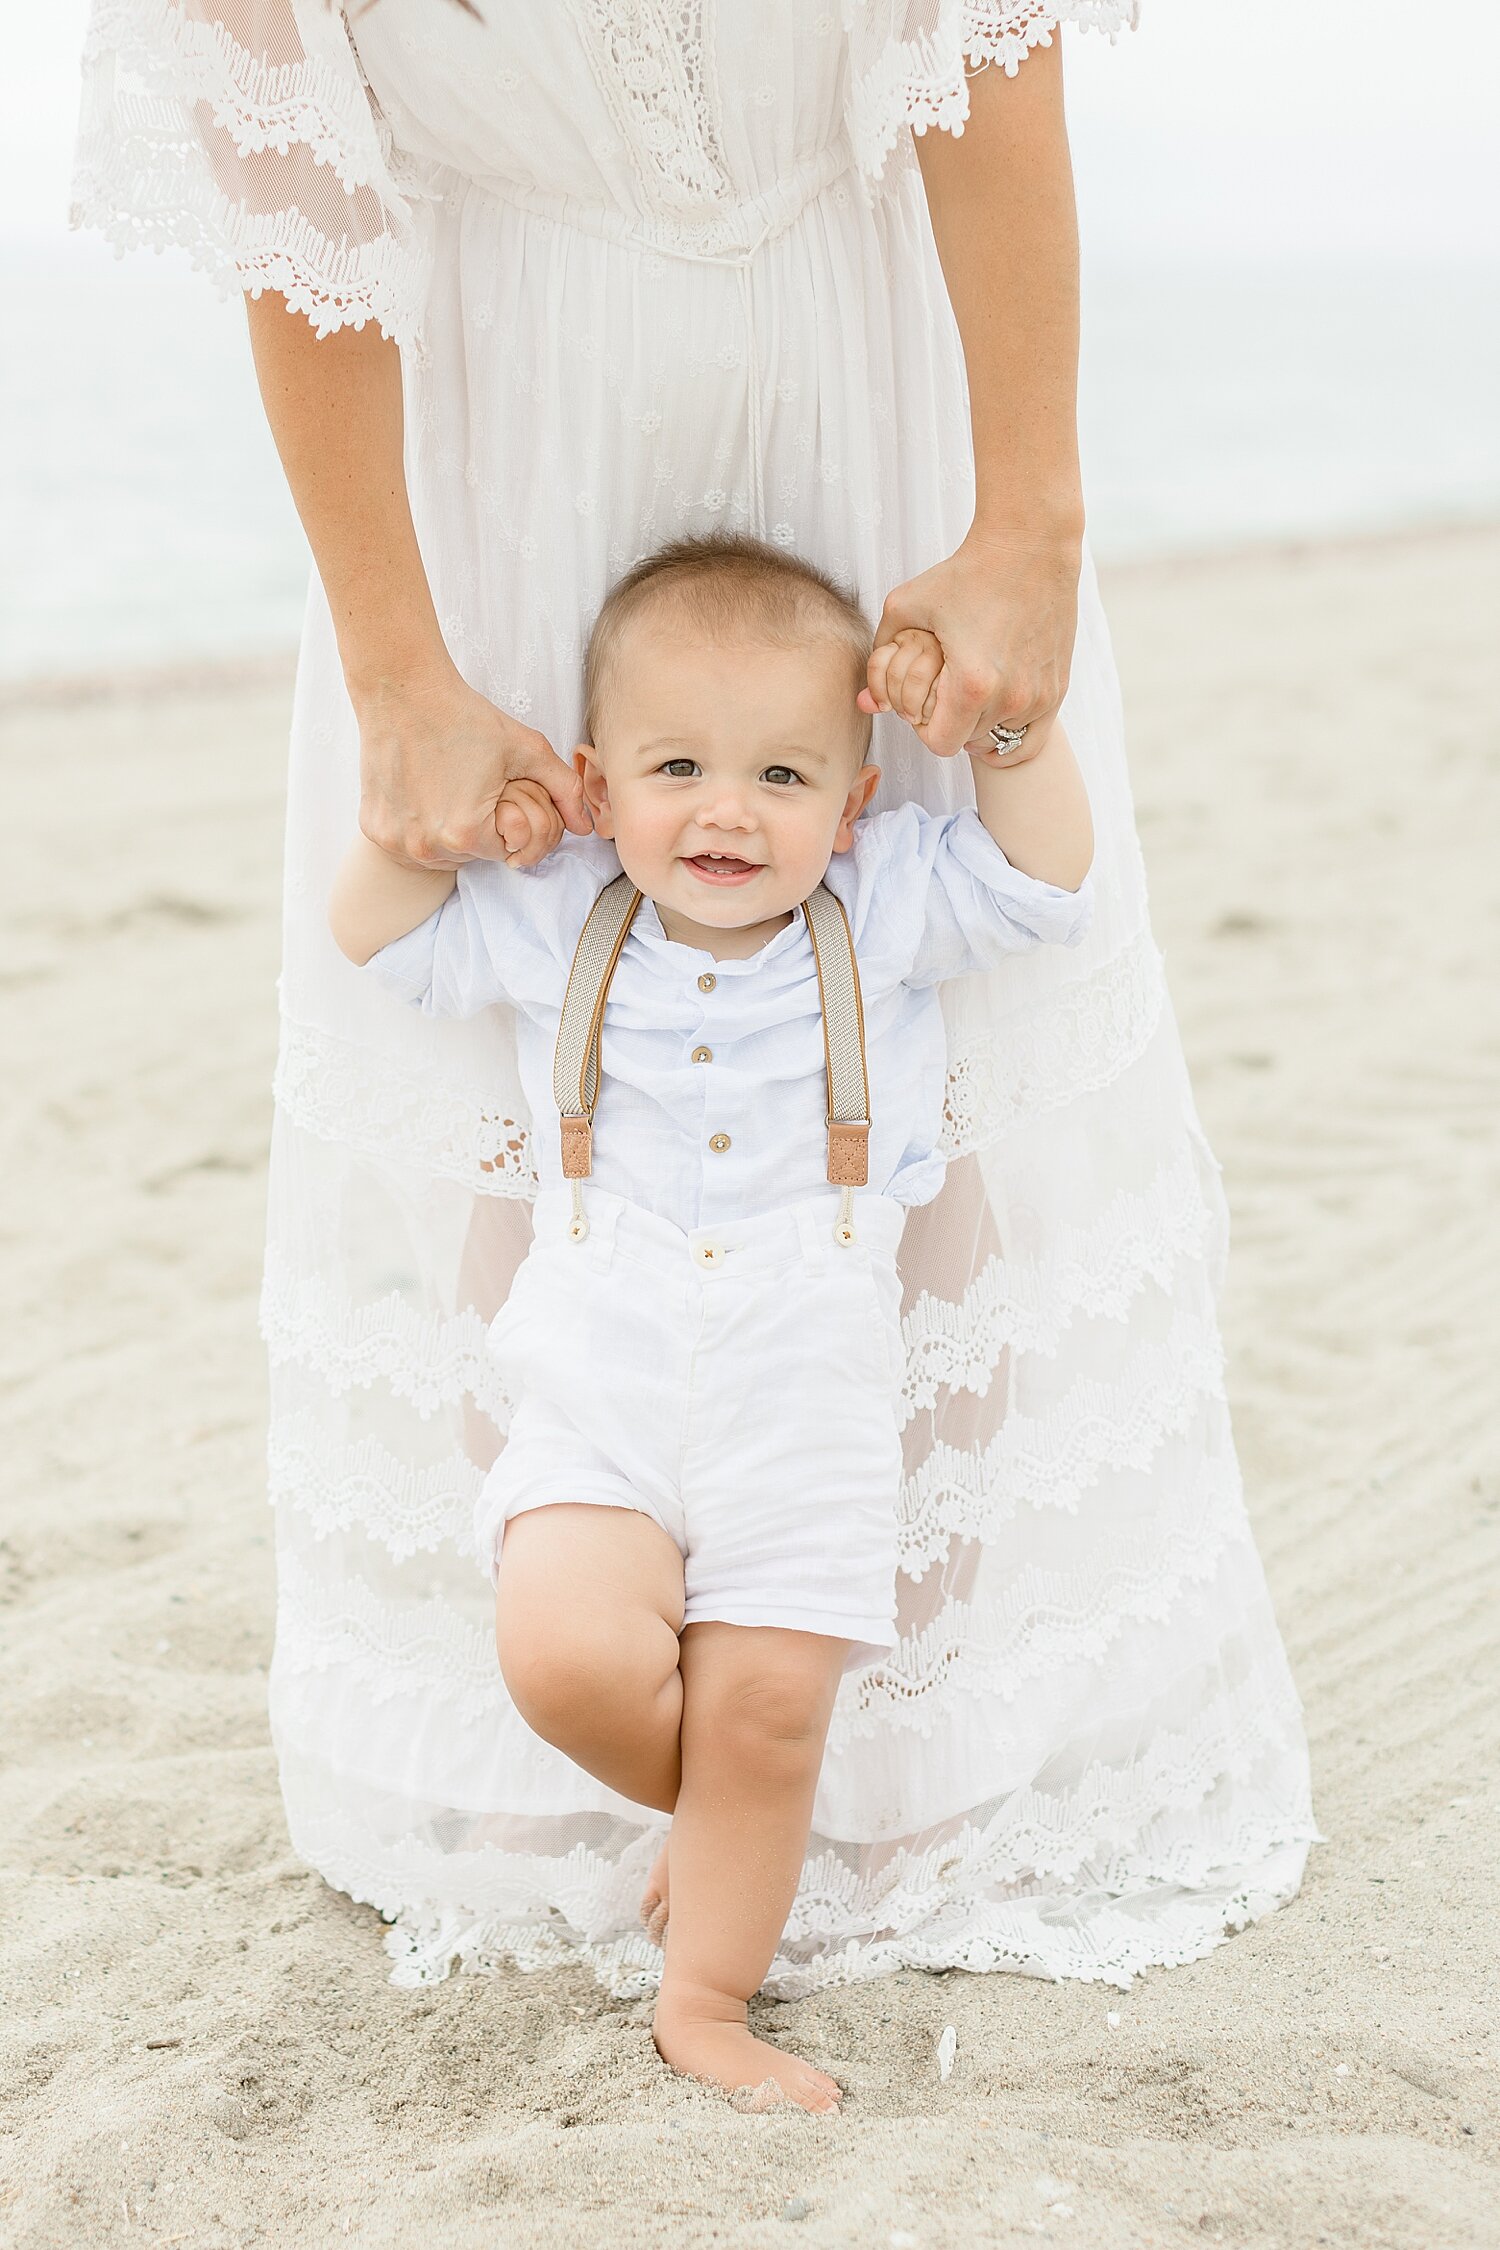 One year old on the beach in suspender shorts | Kristin Wood Photography